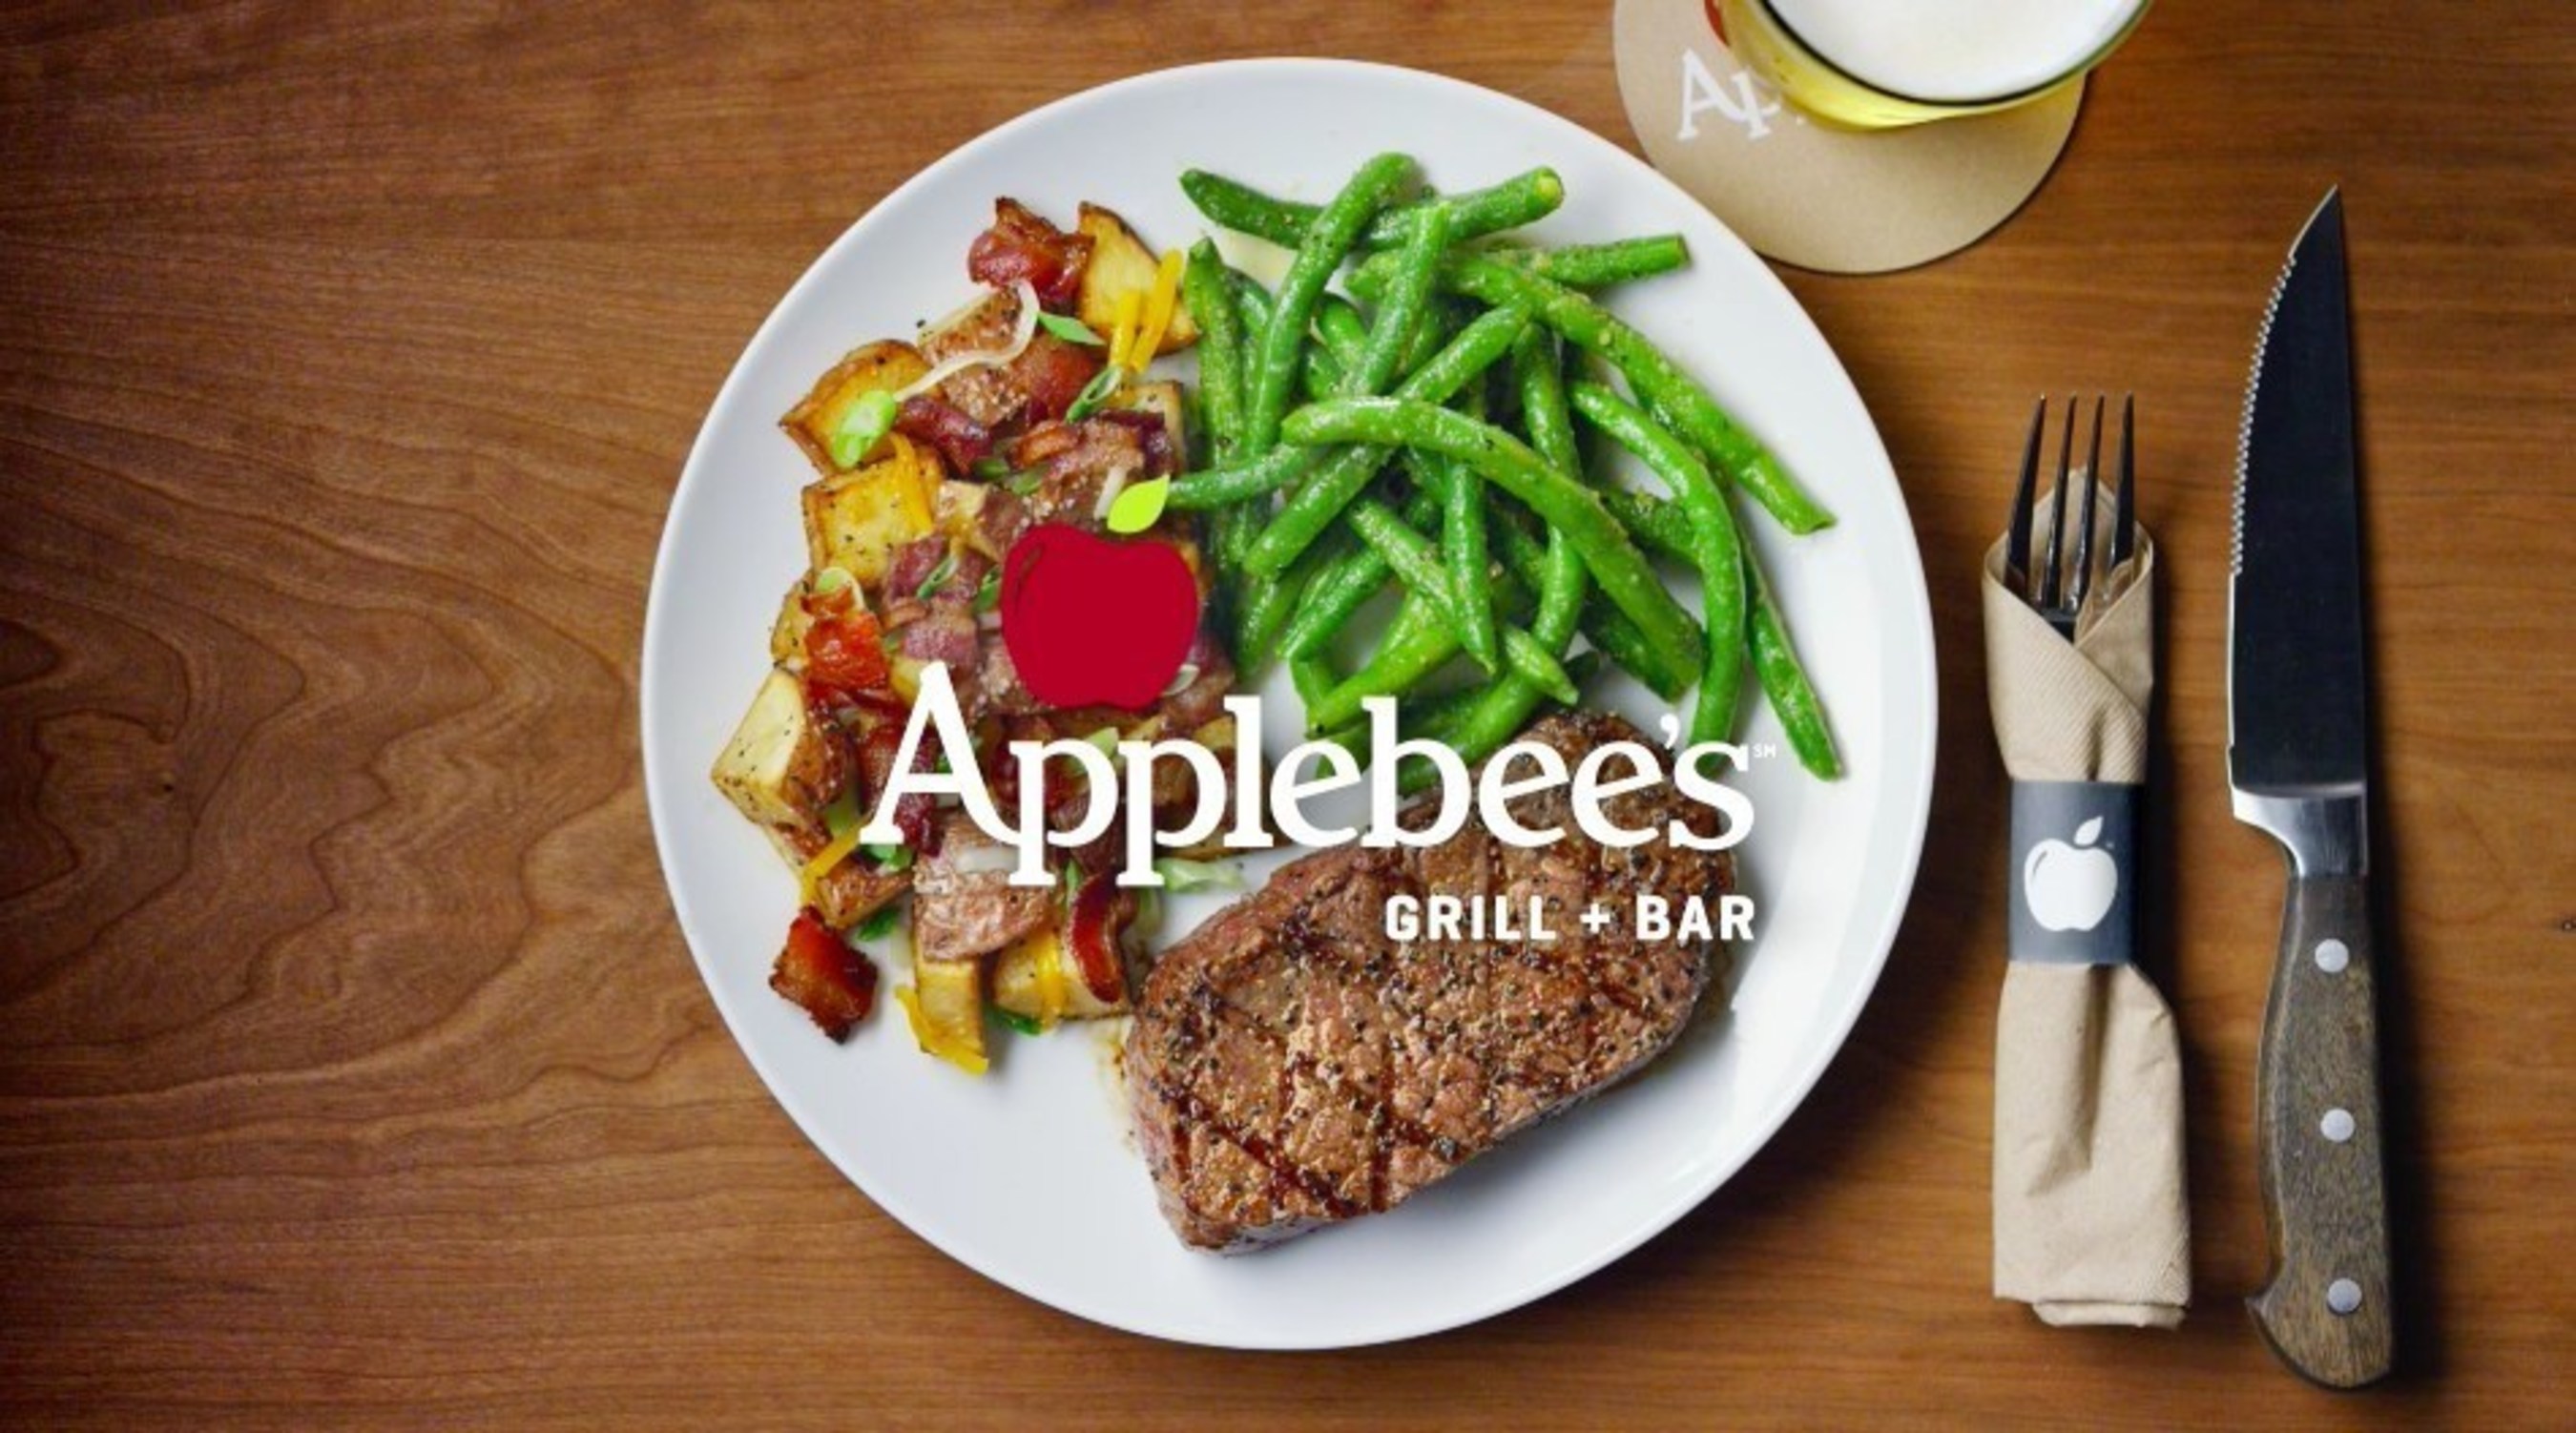 Applebee's is moving to take back America's neighborhoods - its roots as the country's largest casual dining restaurant chain - with the nationwide introduction of new wood-fired grills and USDA Choice steaks hand-cut in-house as the signature item of a new menu that elevates quality, flavor and freshness.